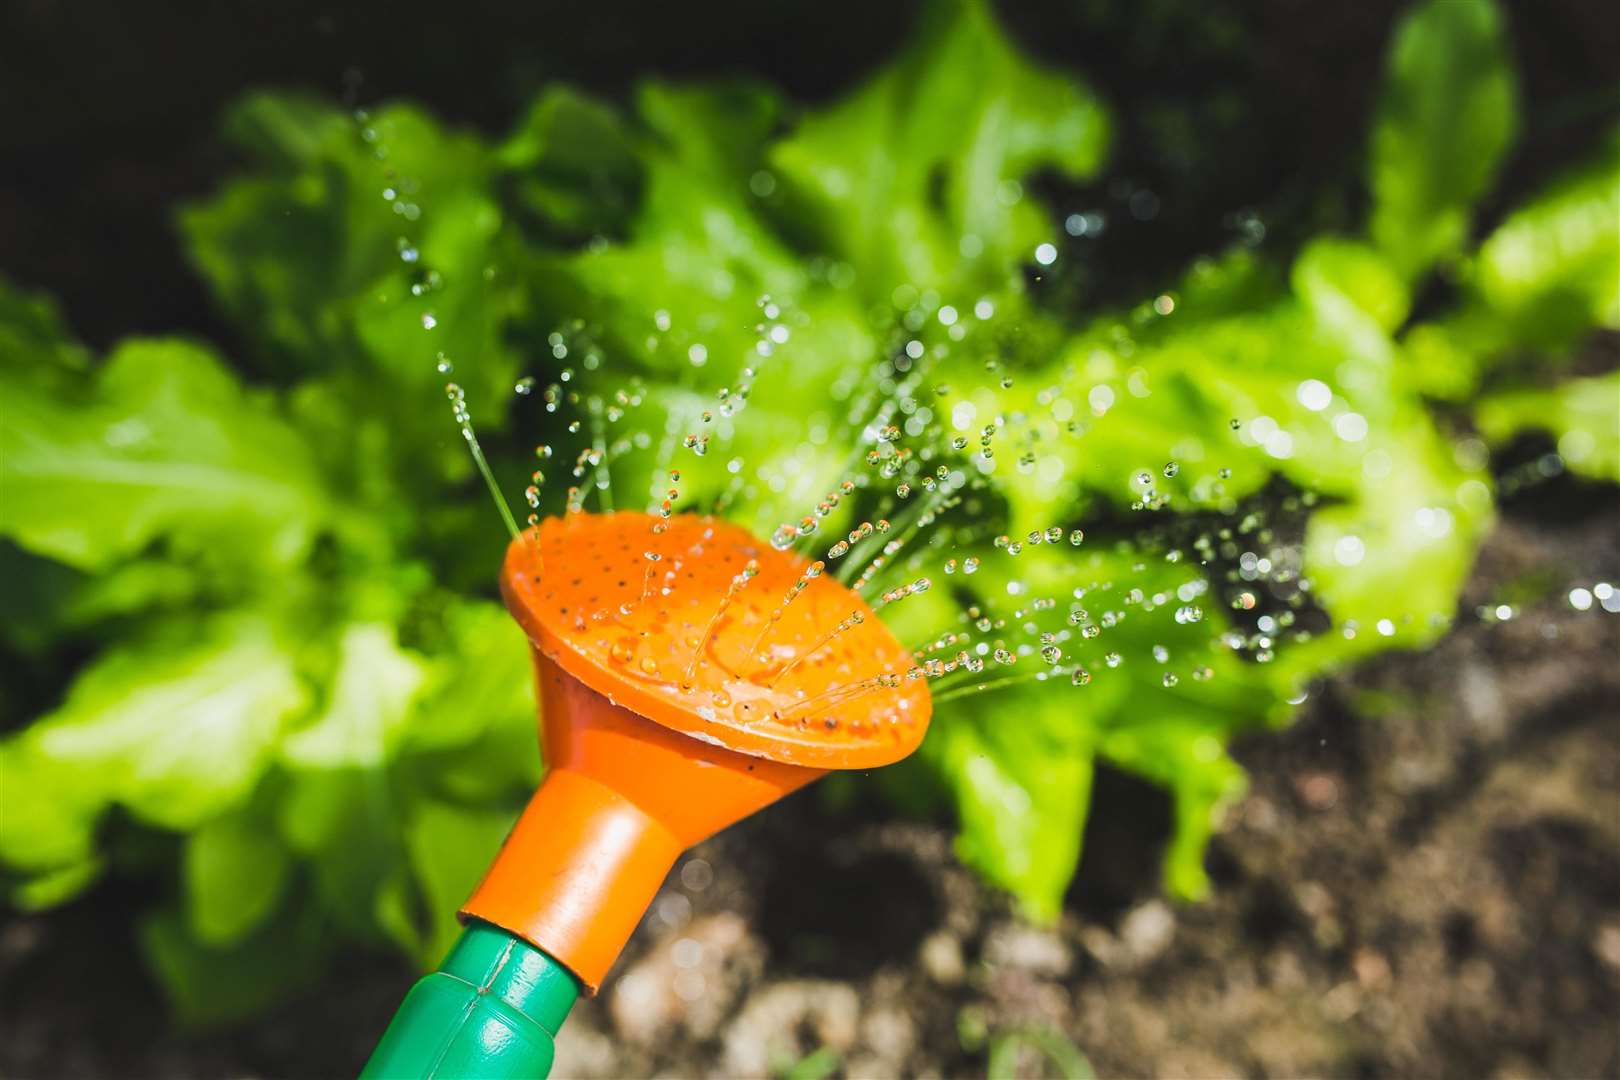 Use a watering can - less wasteful than a sprinkler